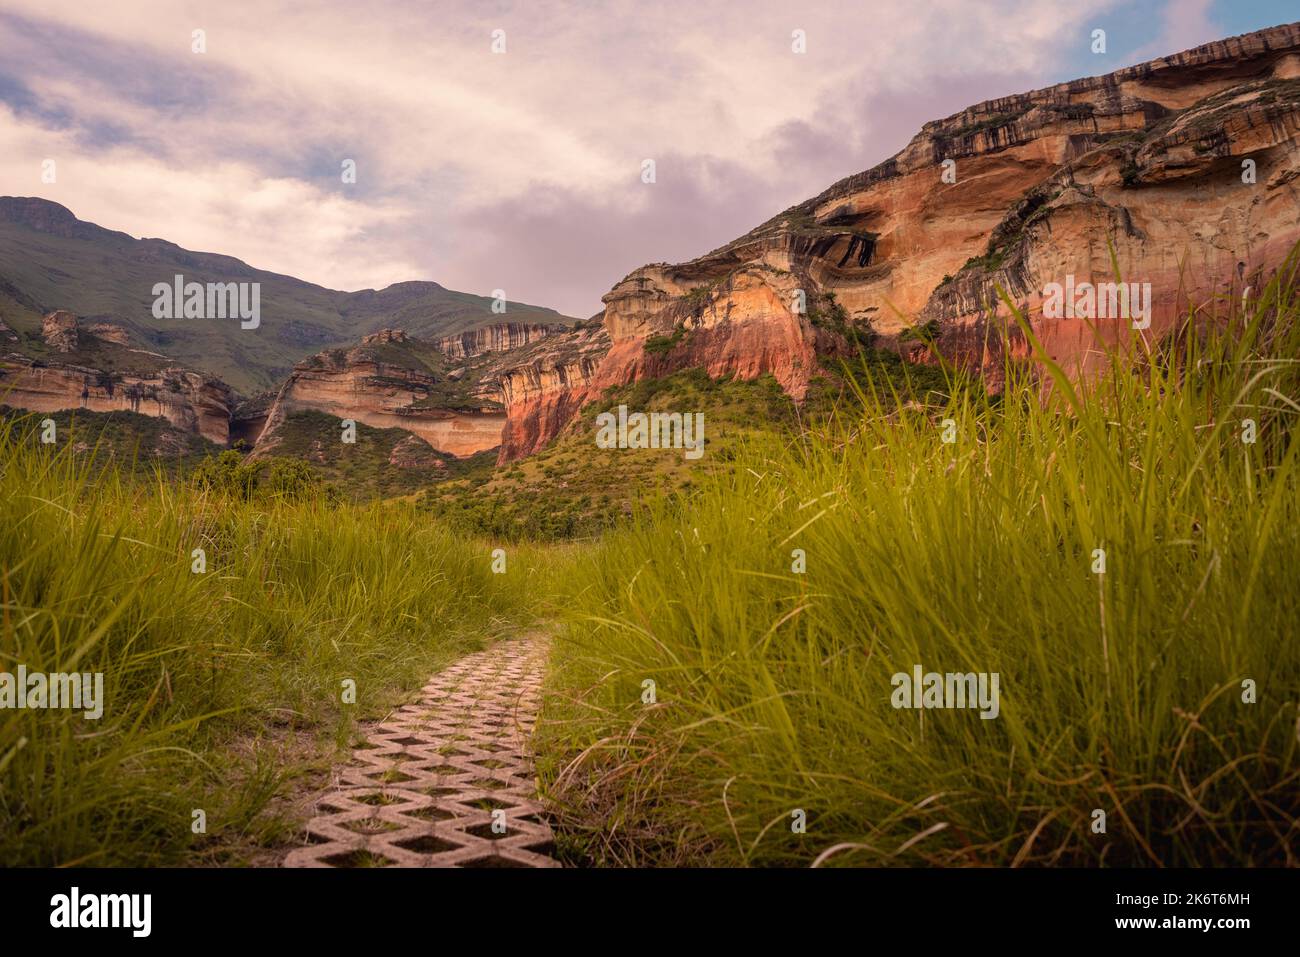 A path leading to Mushroom Rock in the Golden Gate Highlands National Park. This nature reserve is part of the Maluti Mountains belonging to the Drake Stock Photo